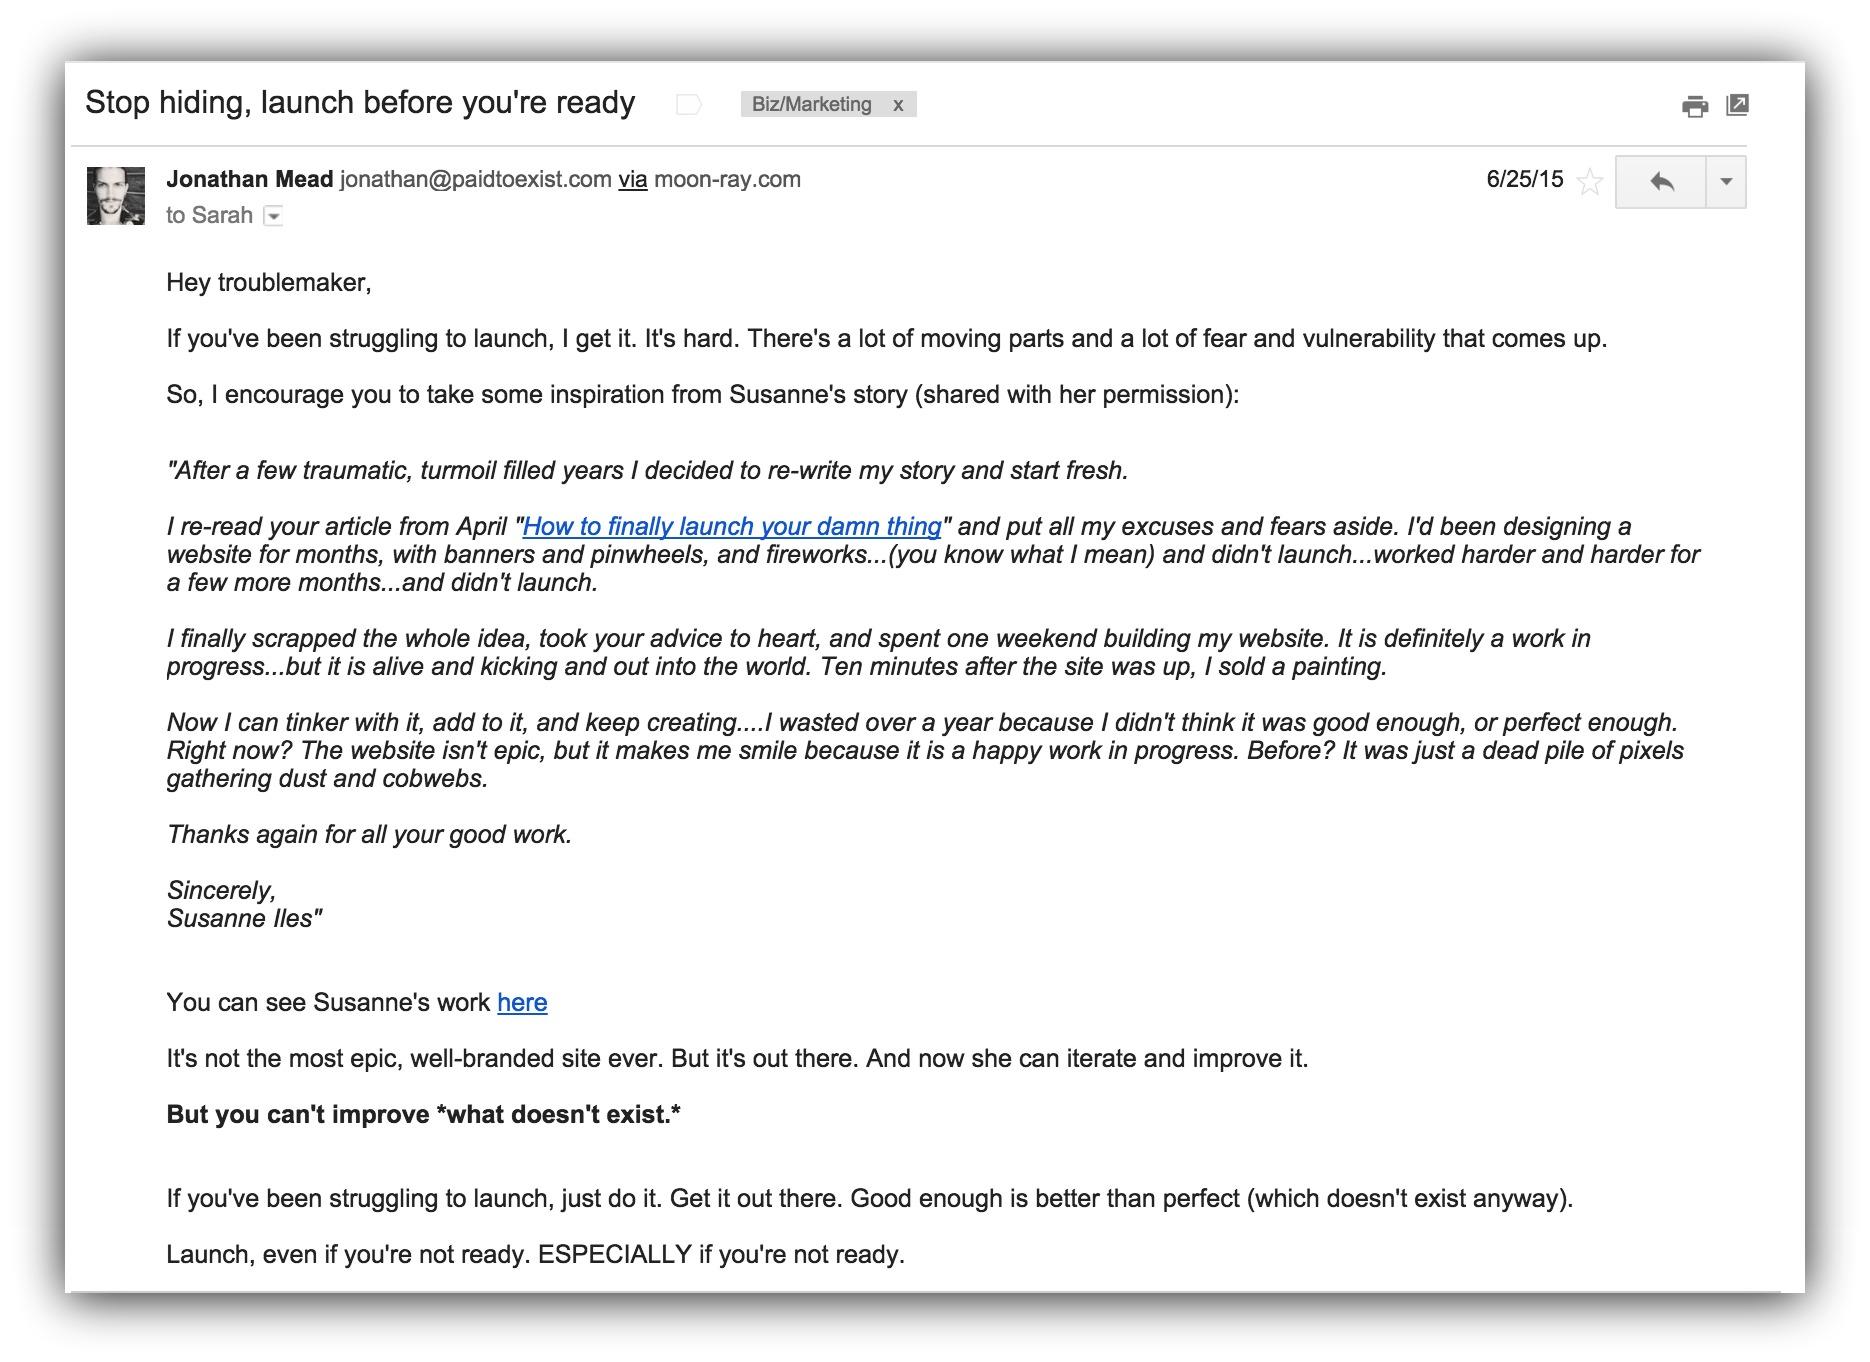 Screenshot of an email sent by Jonathan Mead of paidtoexist